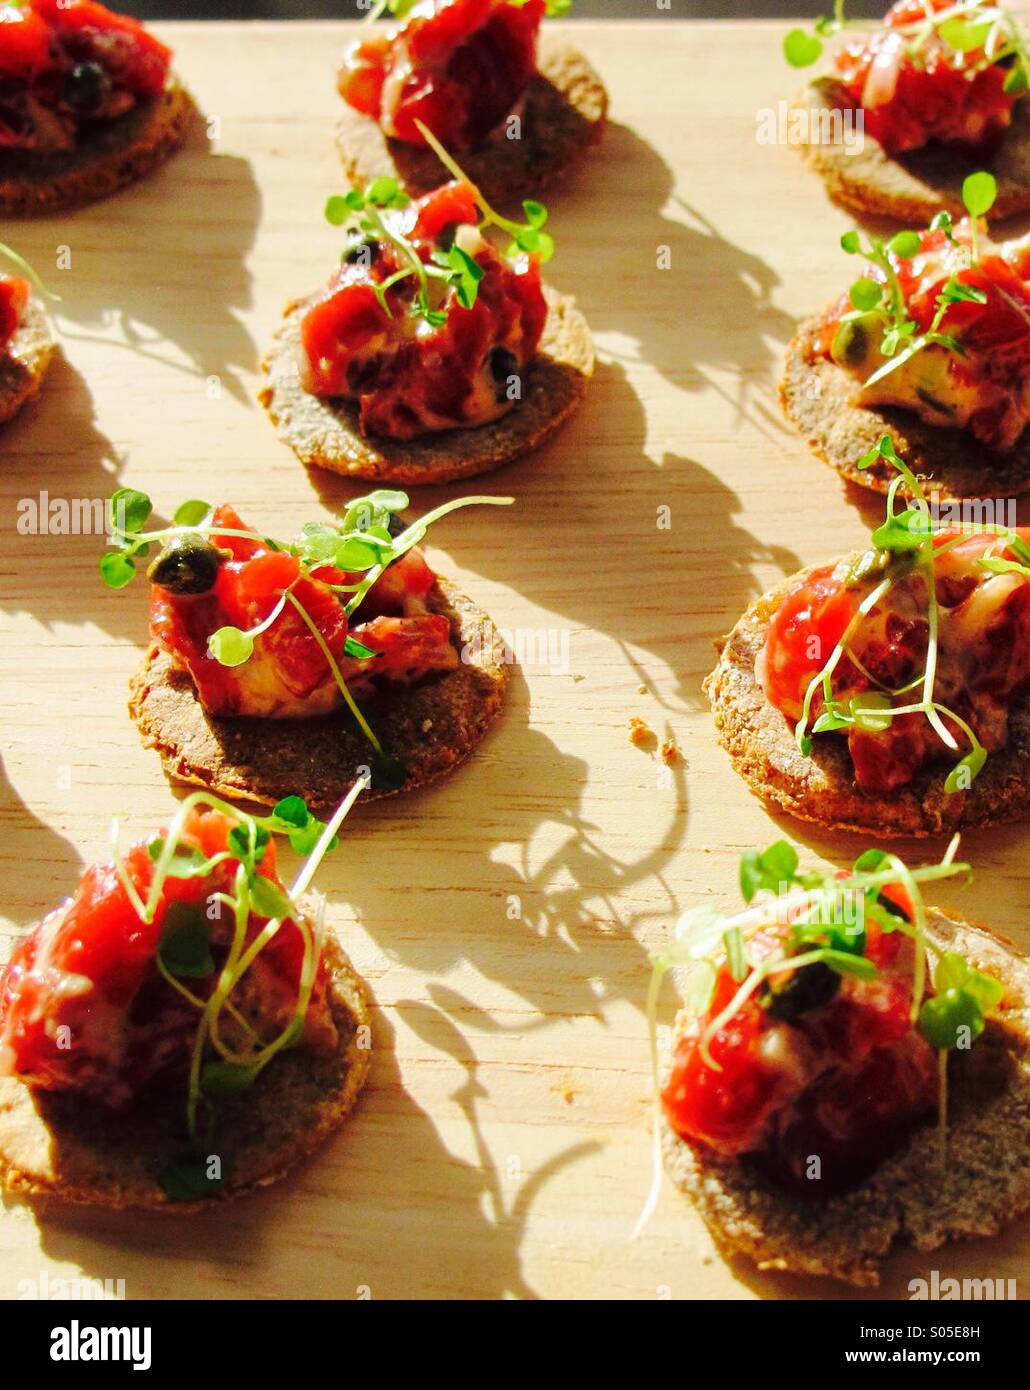 Snack's or Appetisers carpaccio of beef with herbs on toasties. Served with drinks in the sunshine Stock Photo